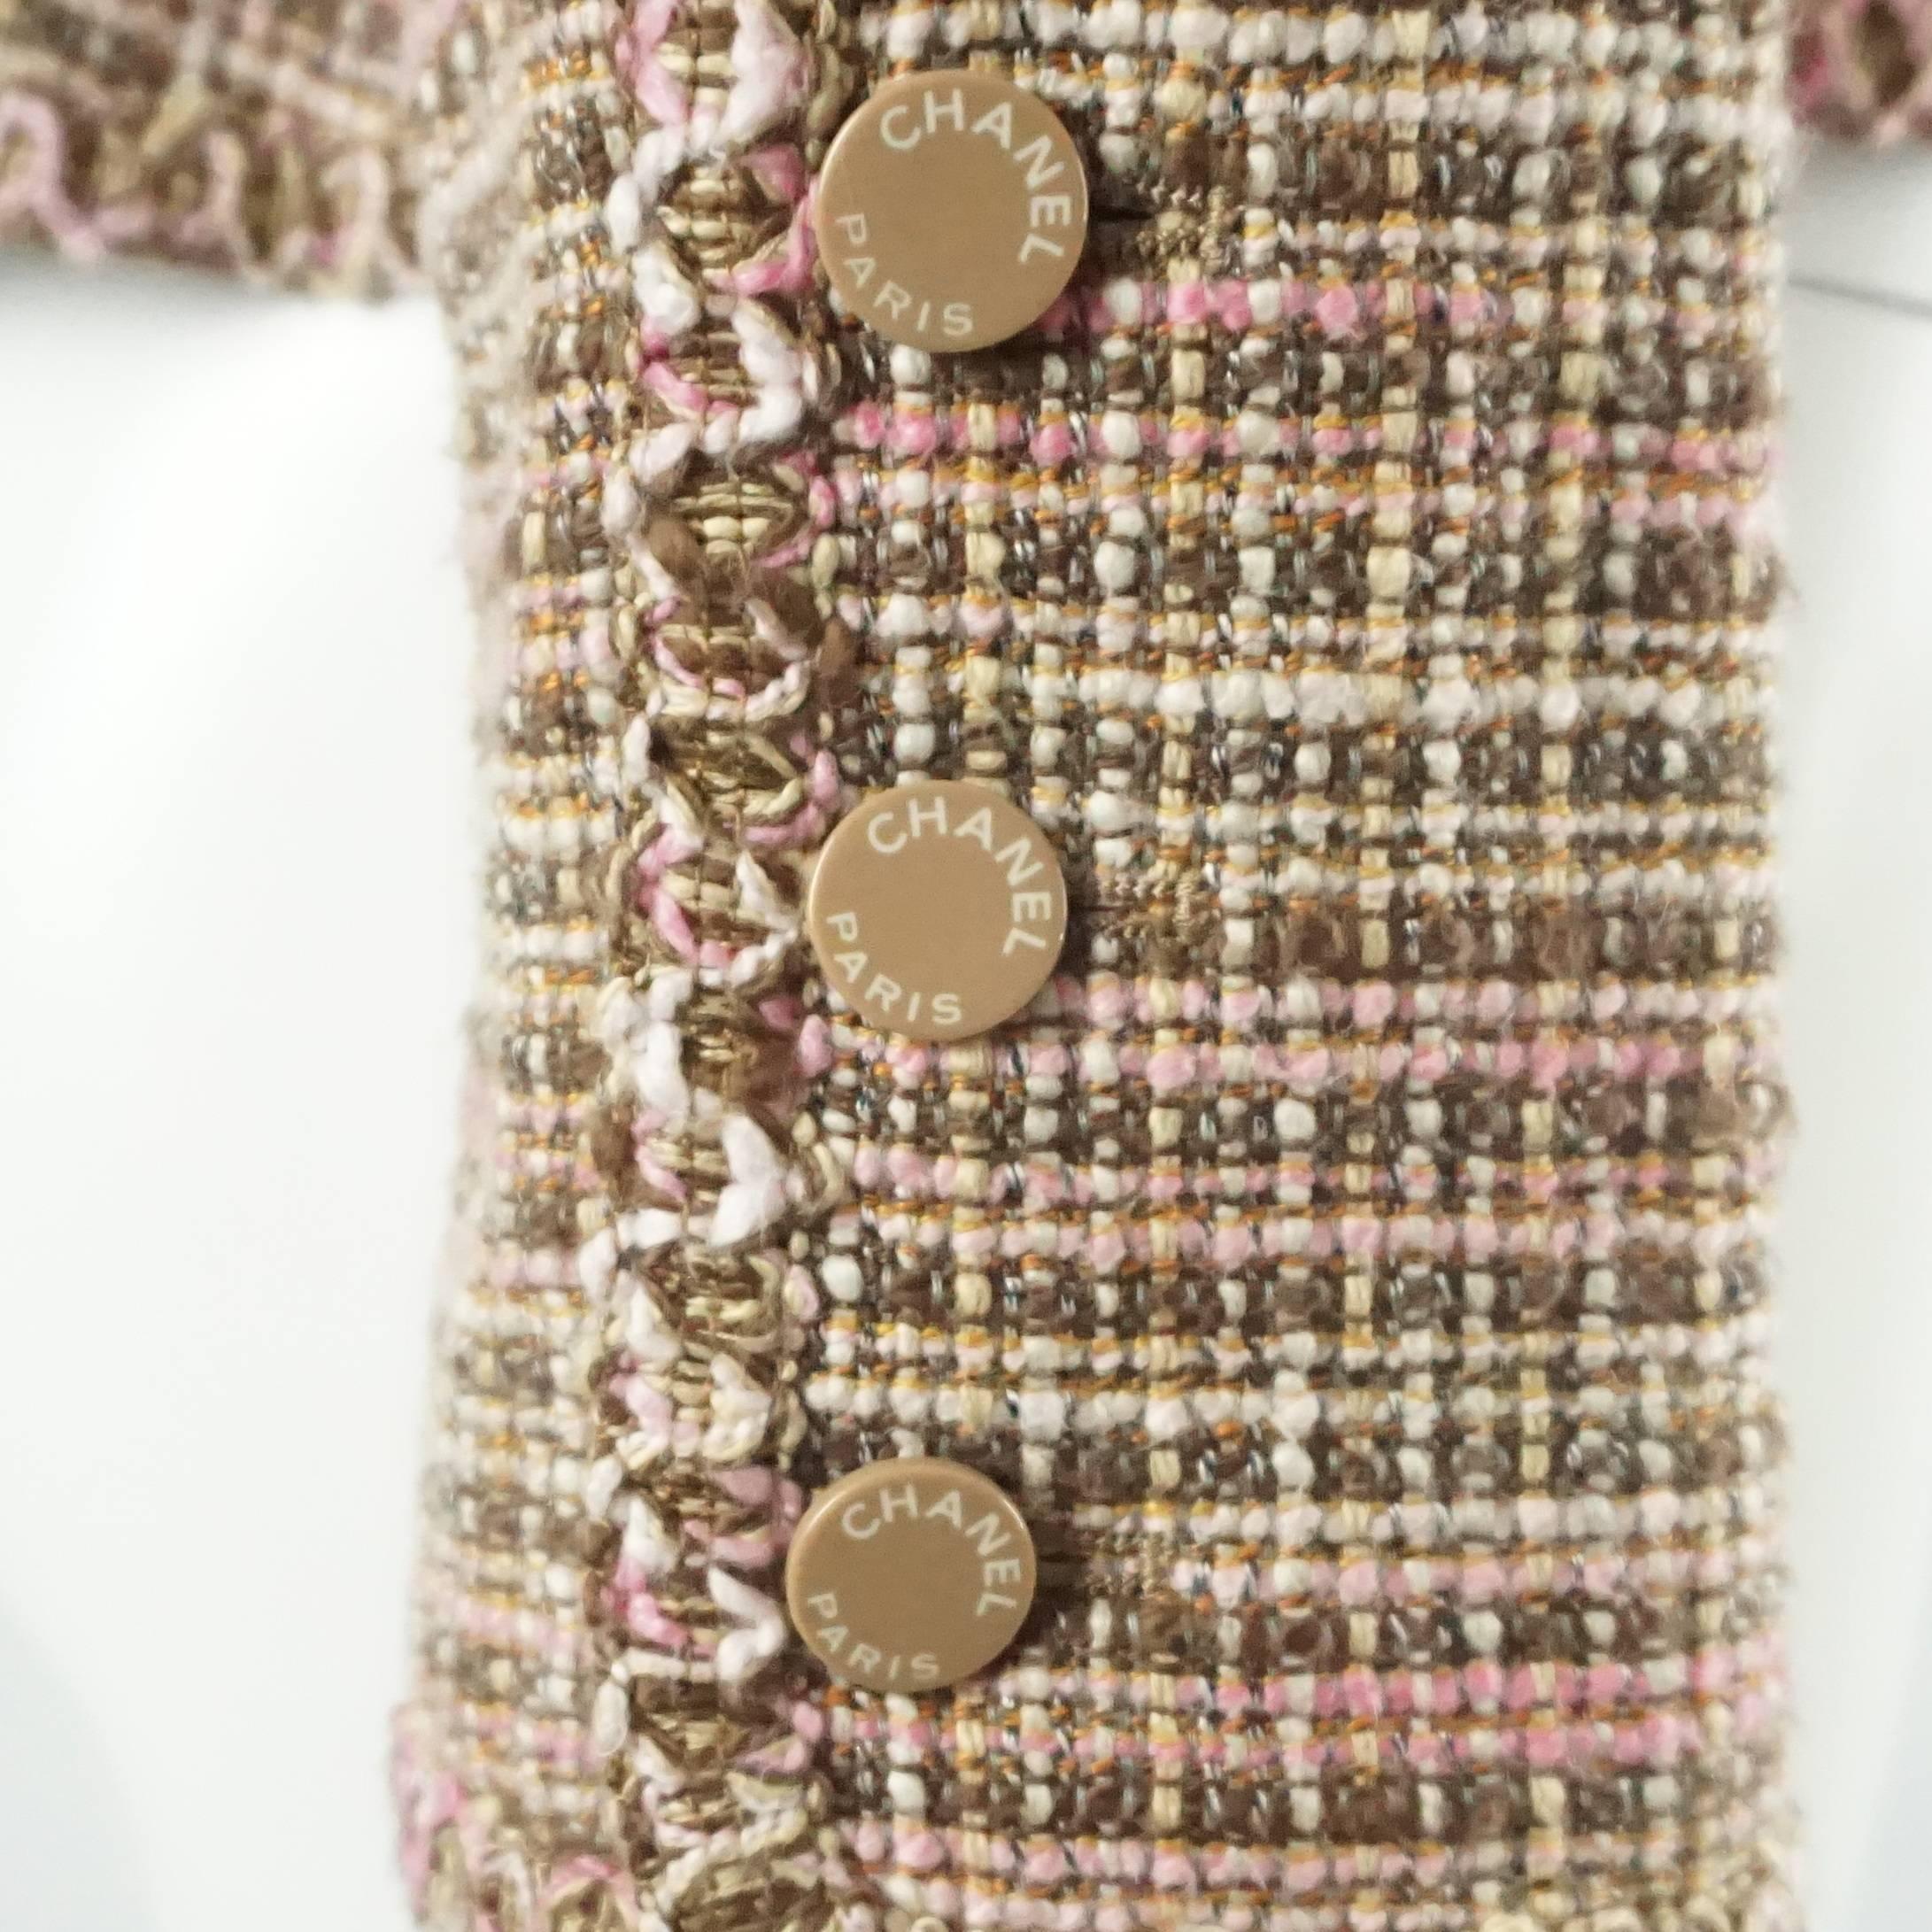 Women's Chanel Brown and Pink Tweed Jacket with 4 Pockets - 42